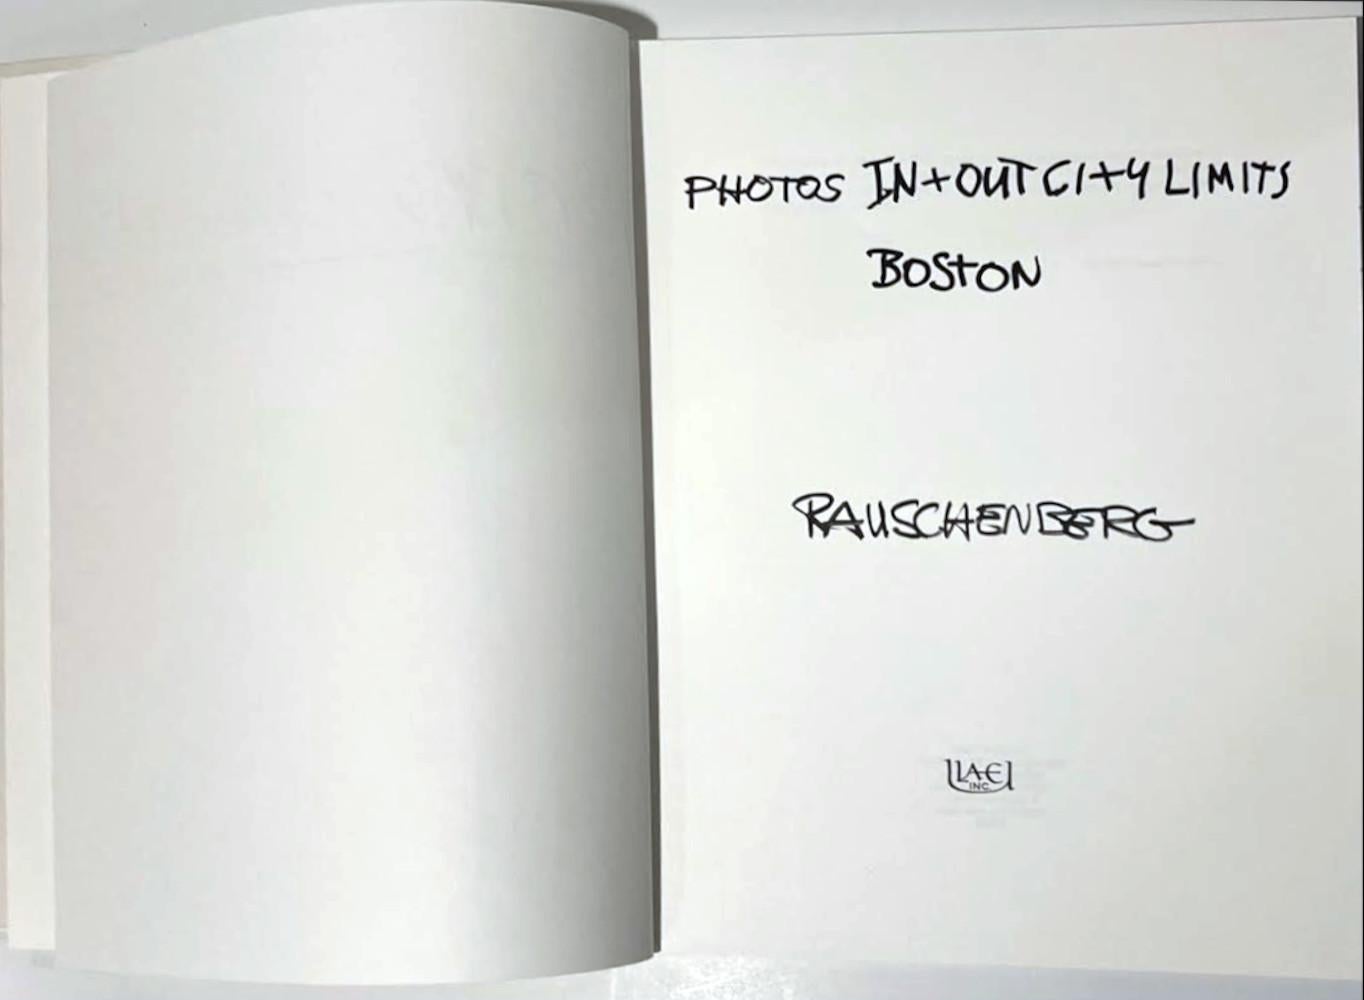 Photos In+Out City Limits: Boston (hand signed by Robert Rauschenberg) Boxed Set For Sale 6